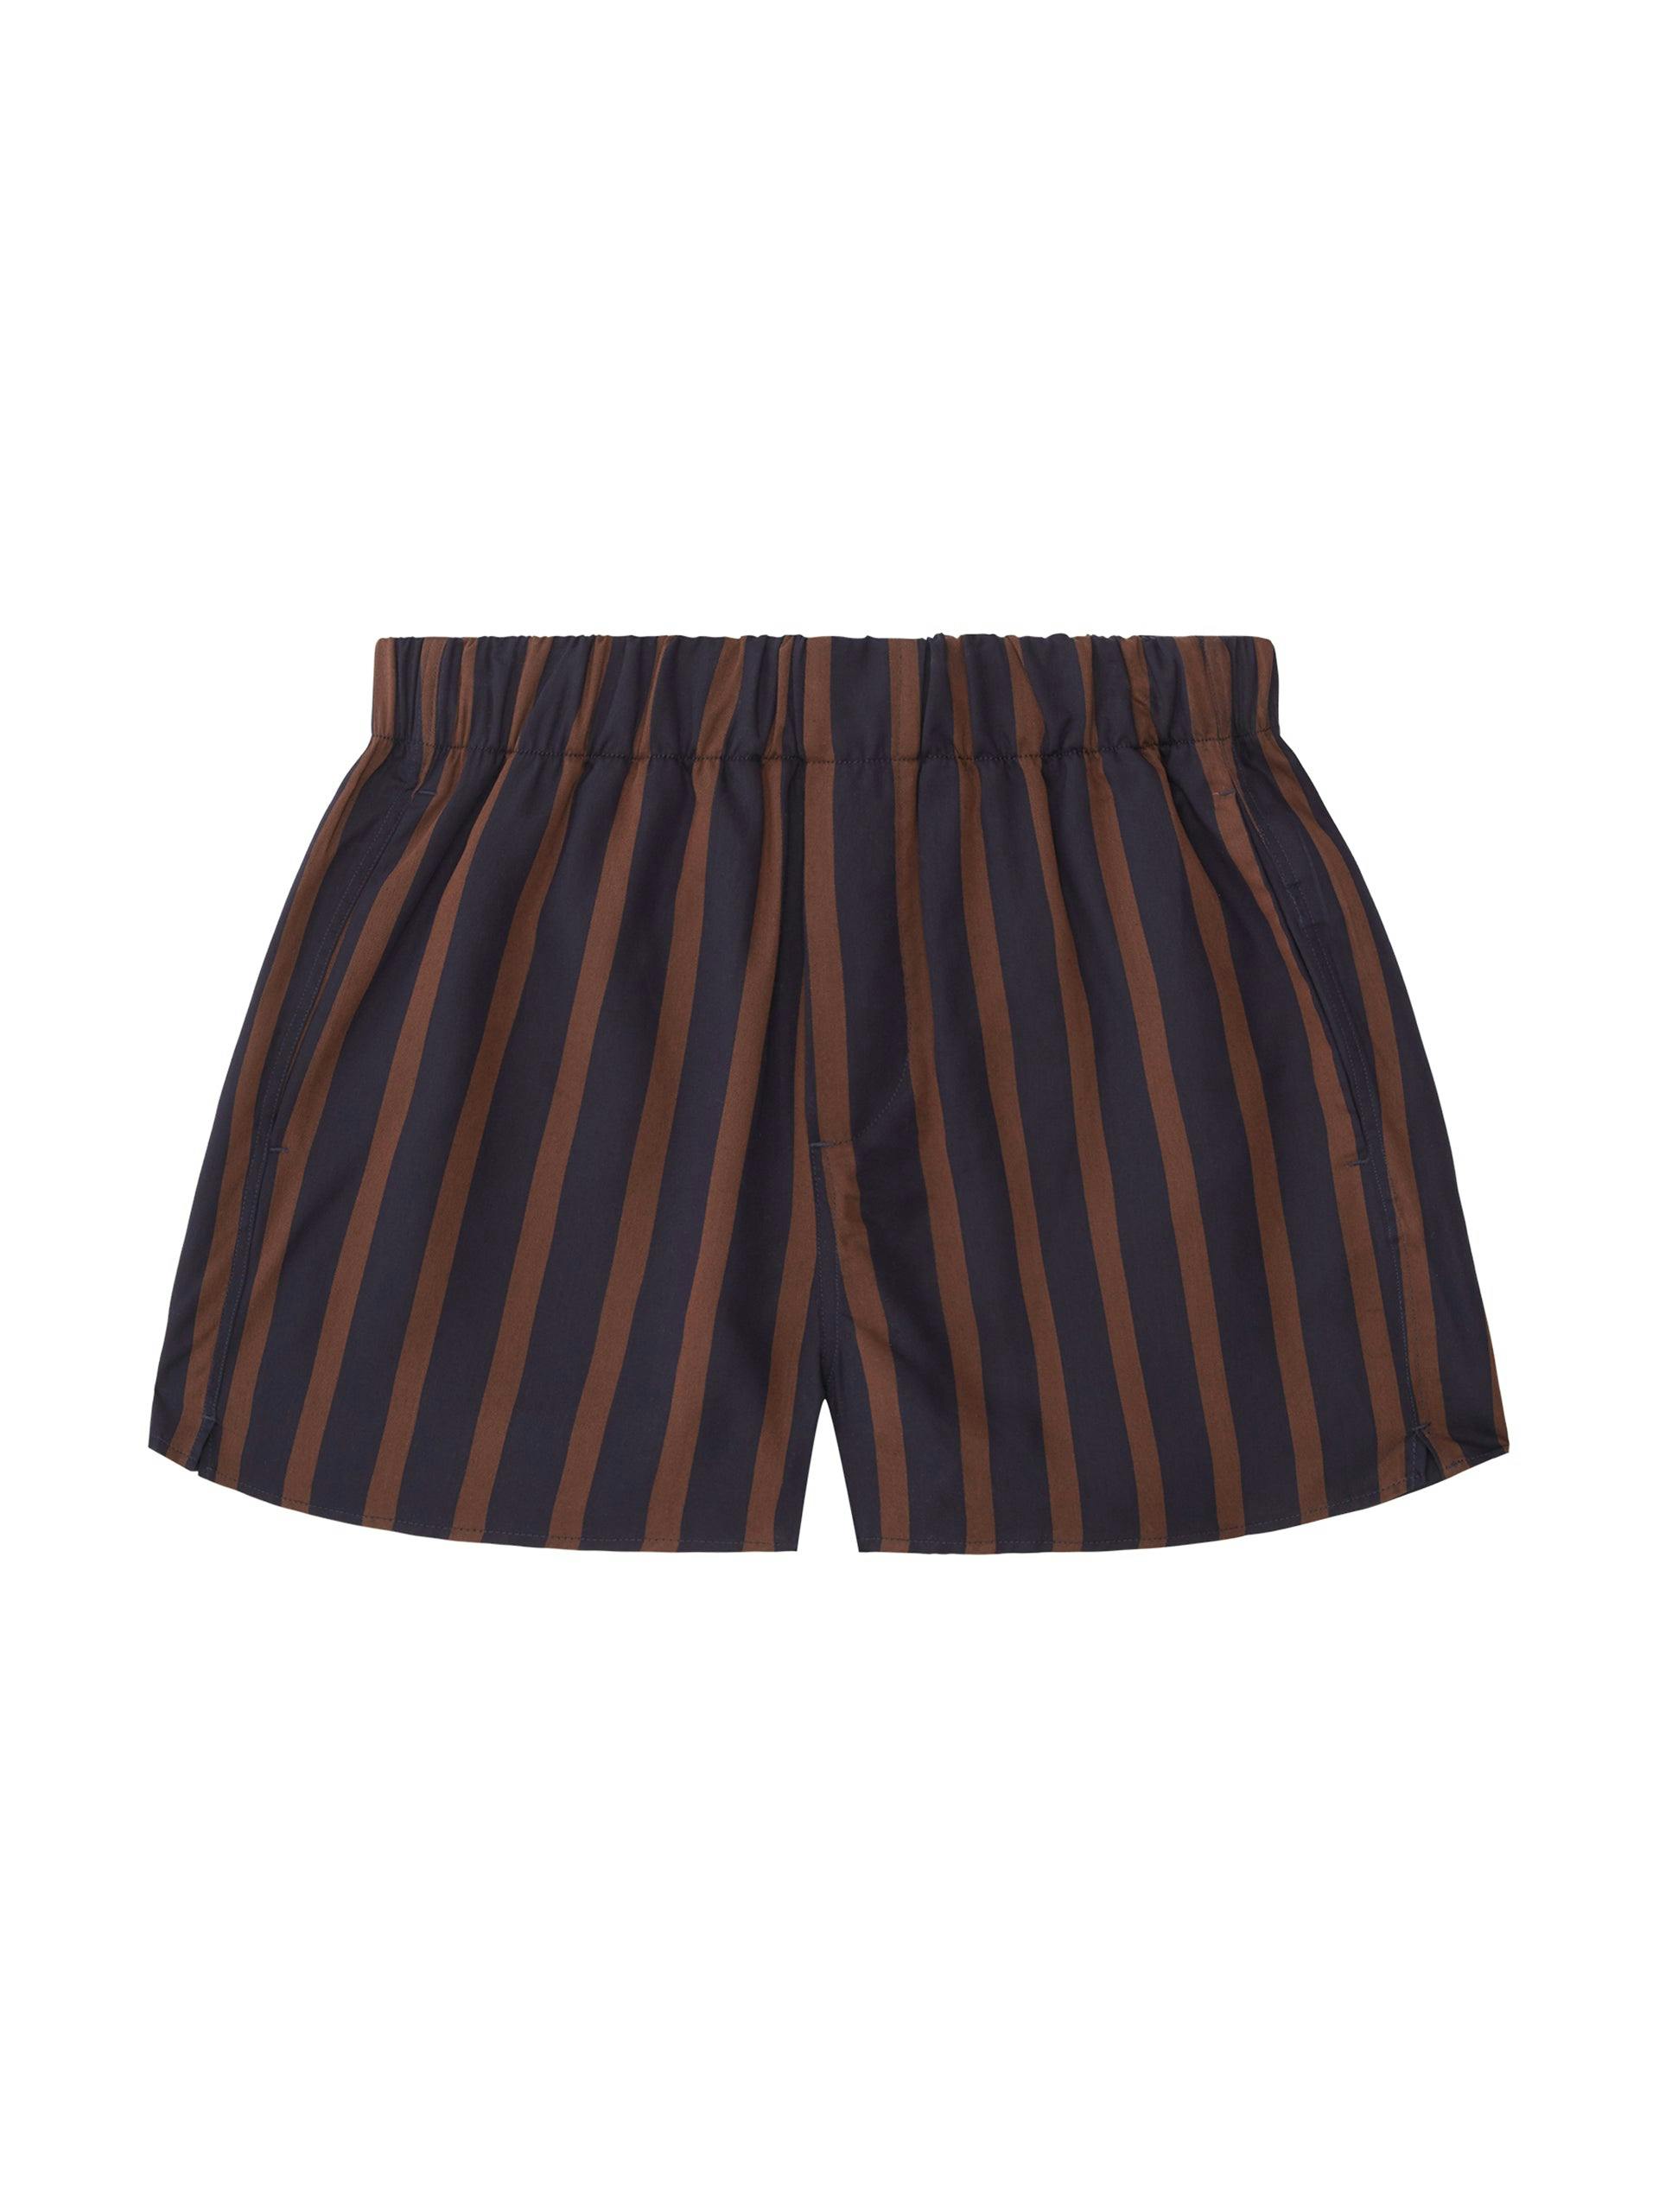 The Collagerie stripe short